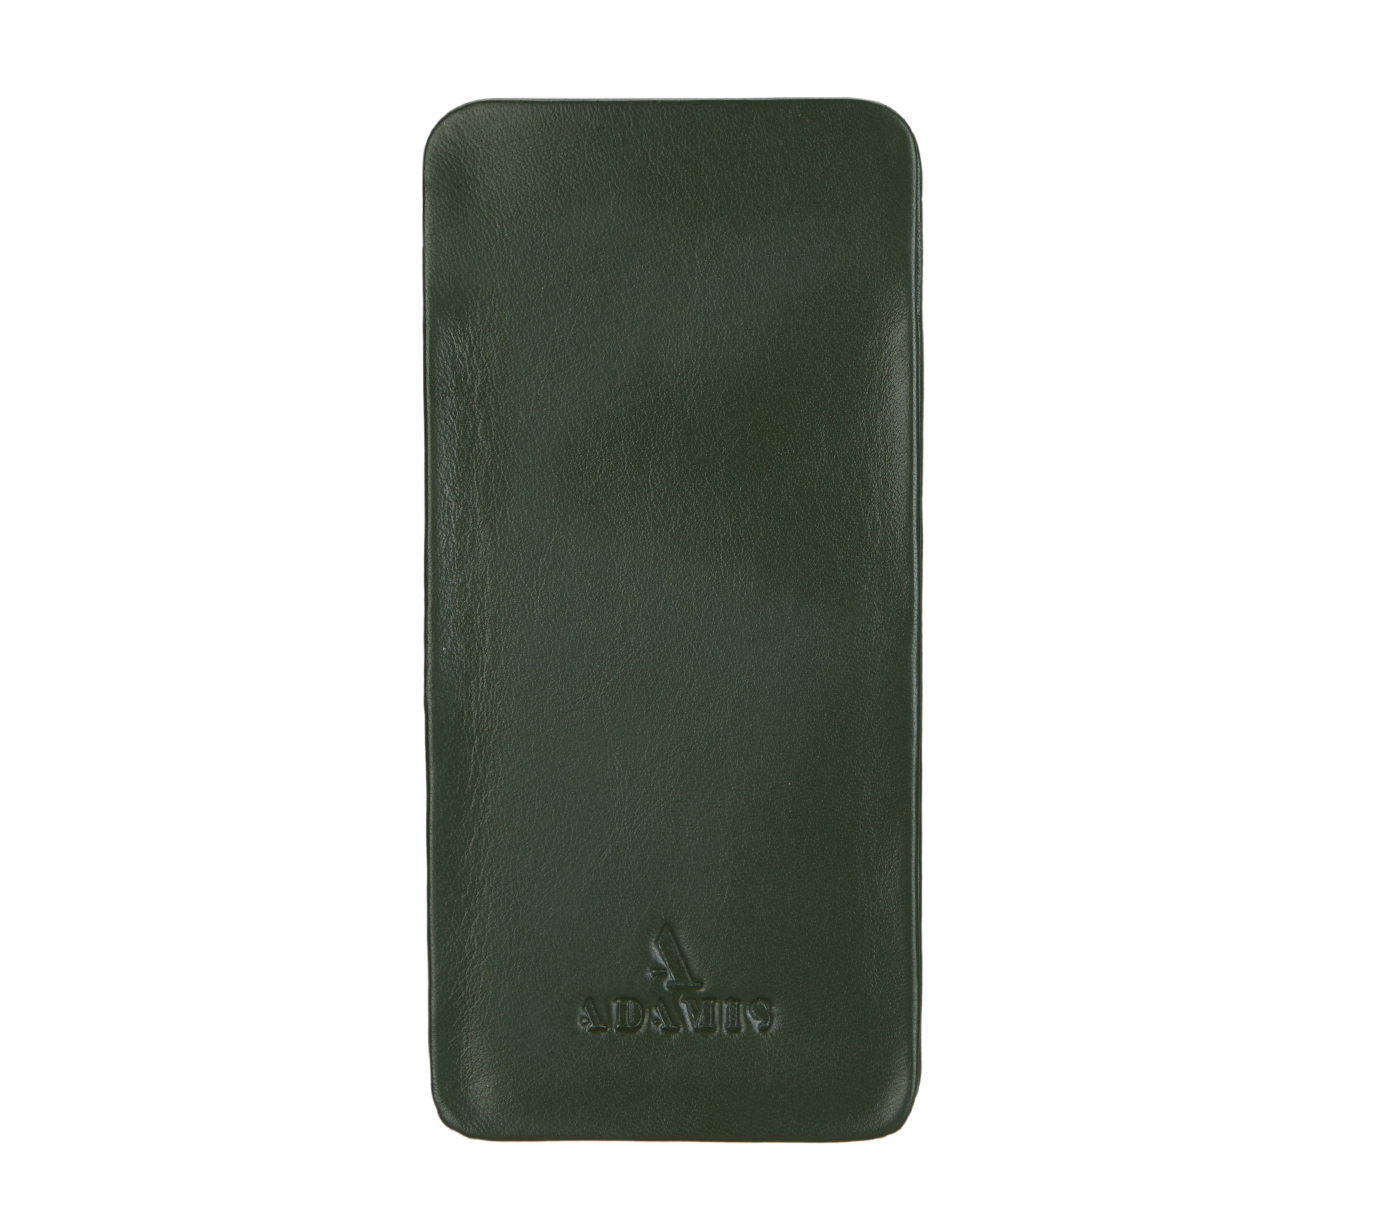 VW11--Soft stitch free spectacle case in Genuine Leather - Green